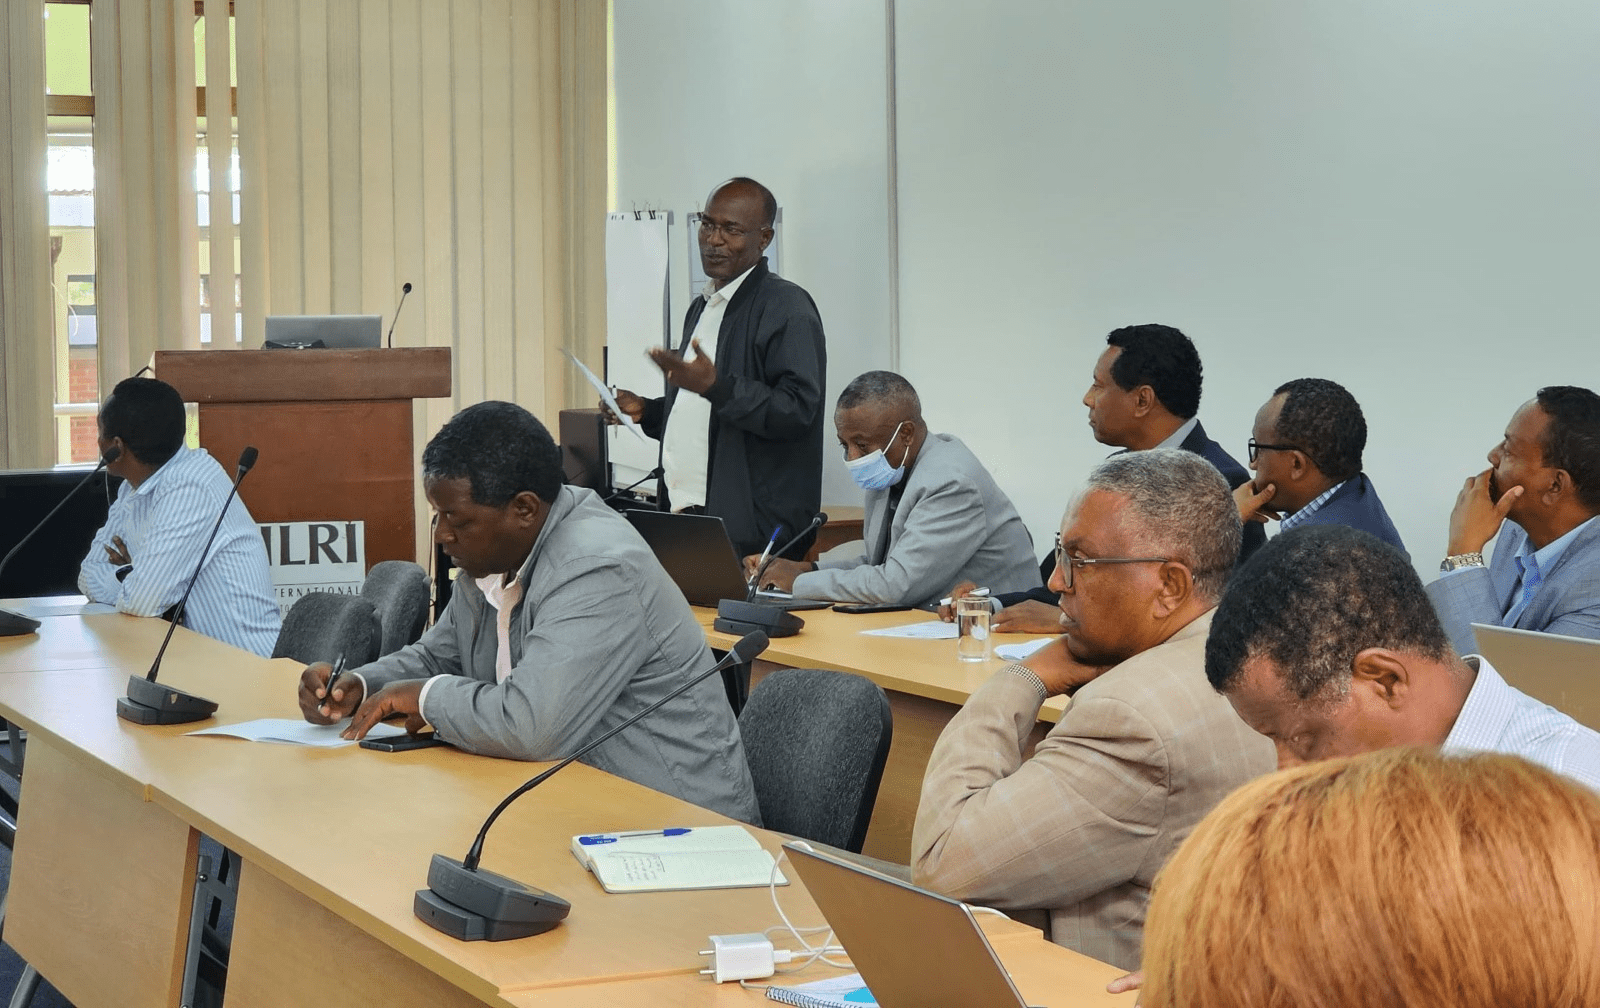 Strengthening Climate Resilience in Pastoral and Agro-Pastoral Areas of Ethiopia through Agro-Climate Advisory and Climate Information Services - Alliance Bioversity International - CIAT - Image 5